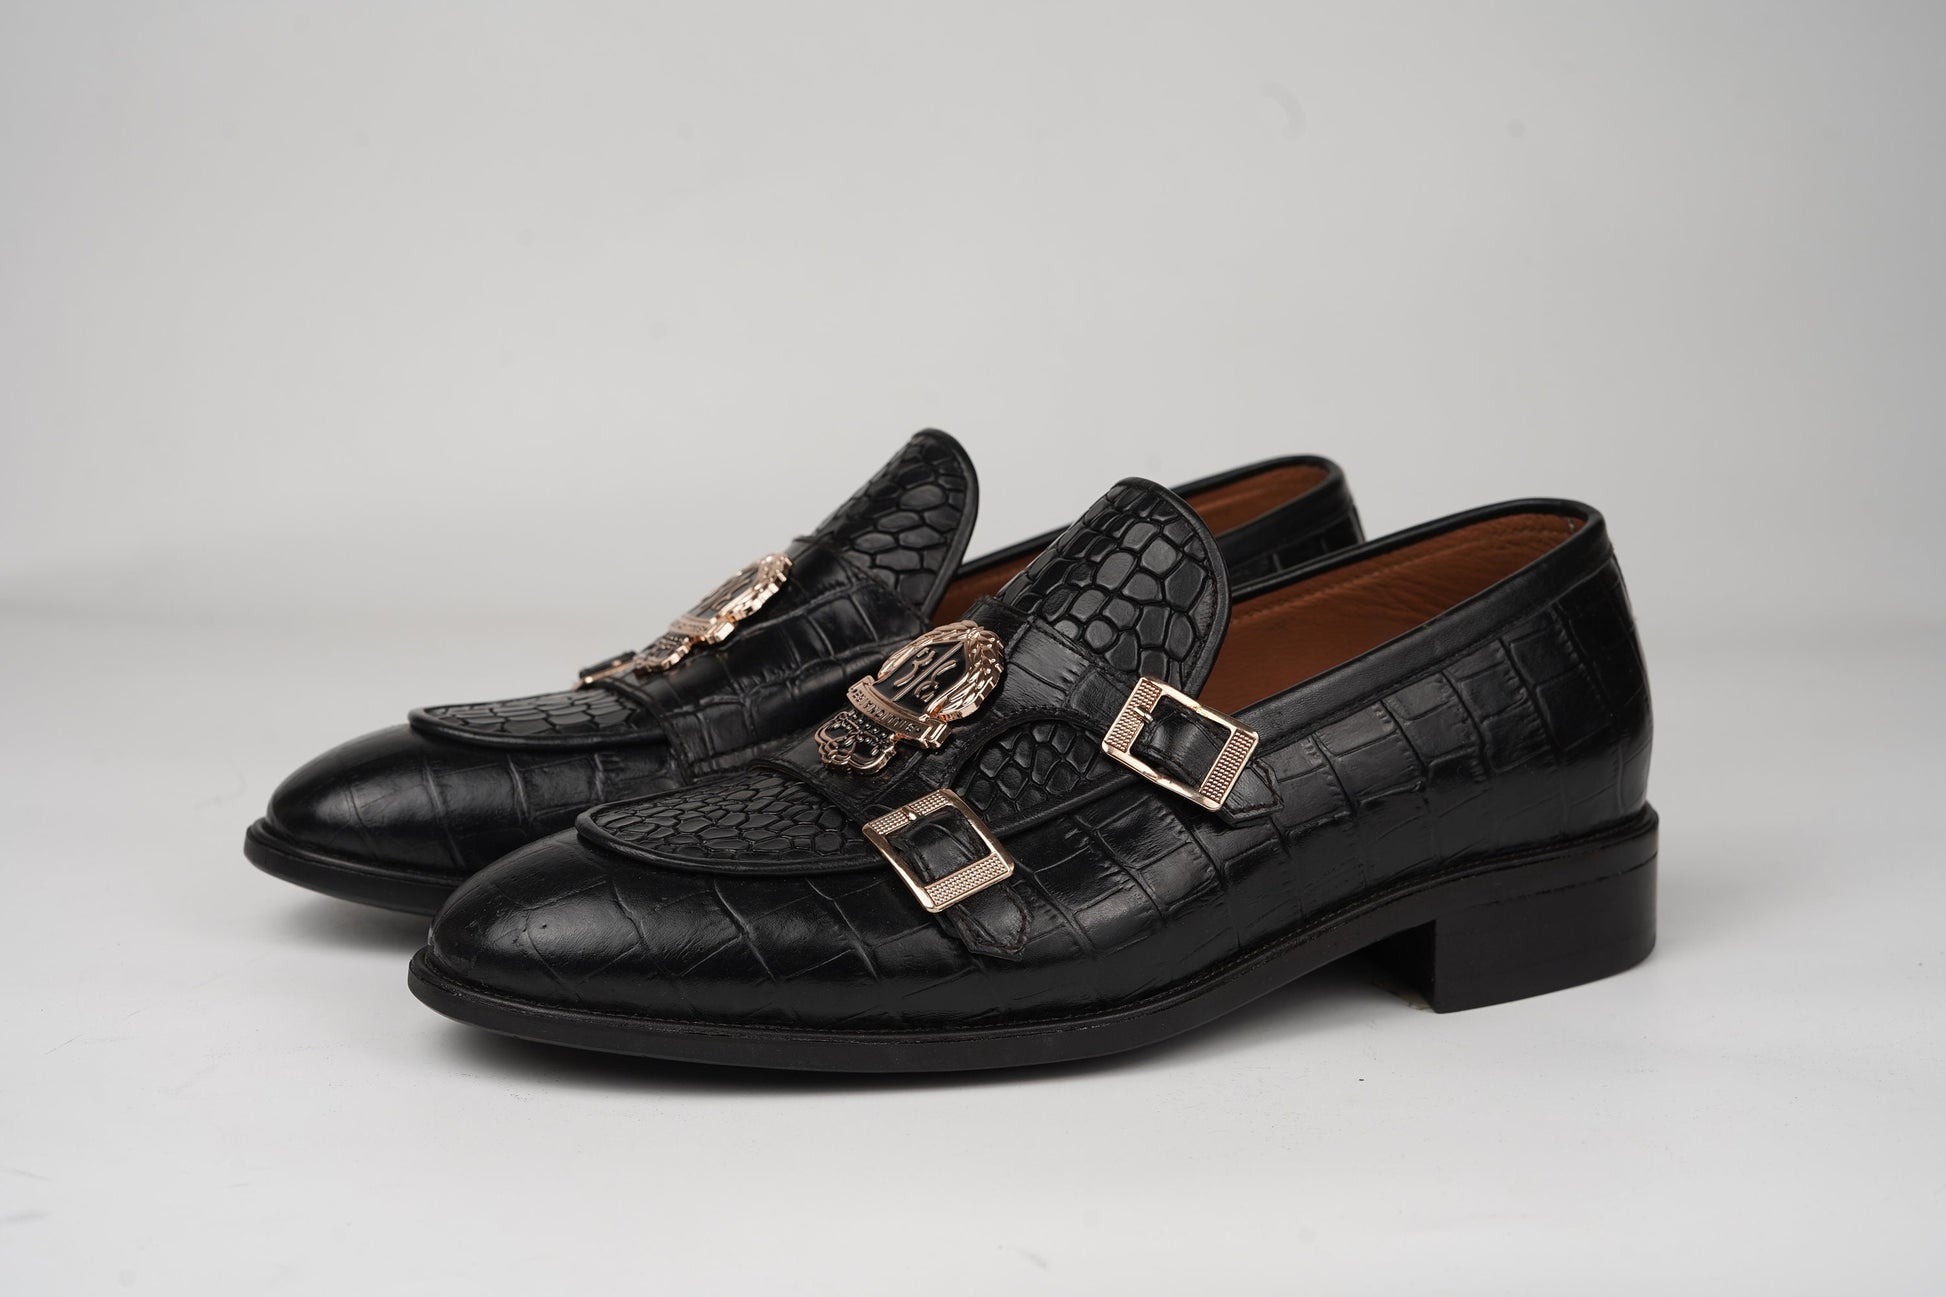 Black Double Buckle Loafer made using embossed Crocodile leather Custom Made-To-Order Shoes  Premium Quality Handmade Woozy Store